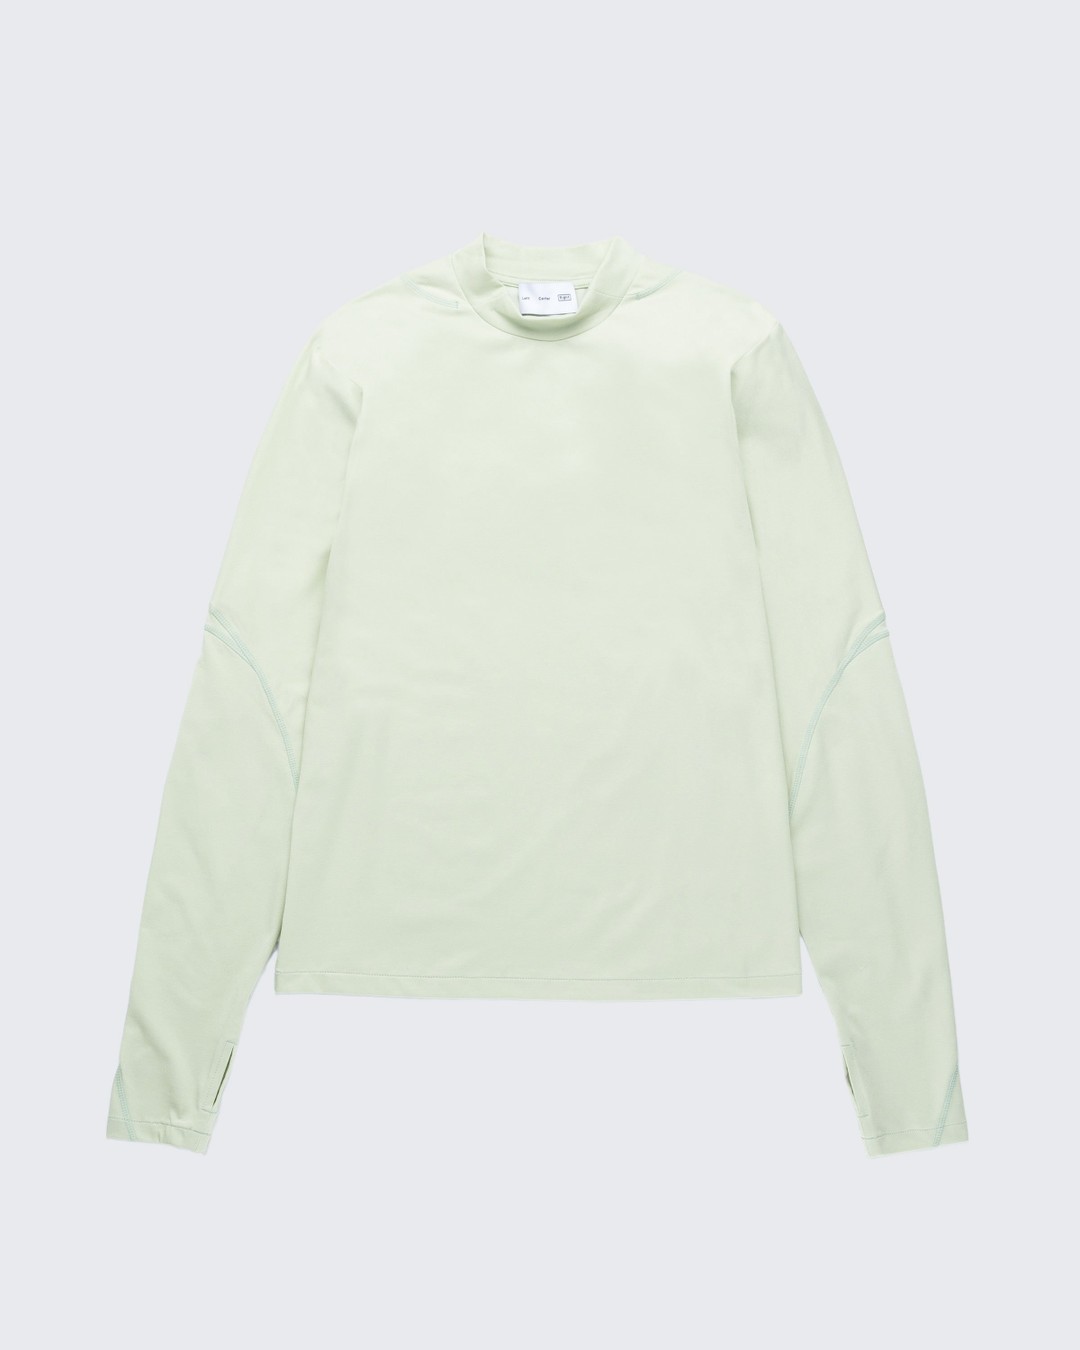 Post Archive Faction (PAF) – 5.0 Longsleeve Right Shirt Lime - Longsleeves - Green - Image 1